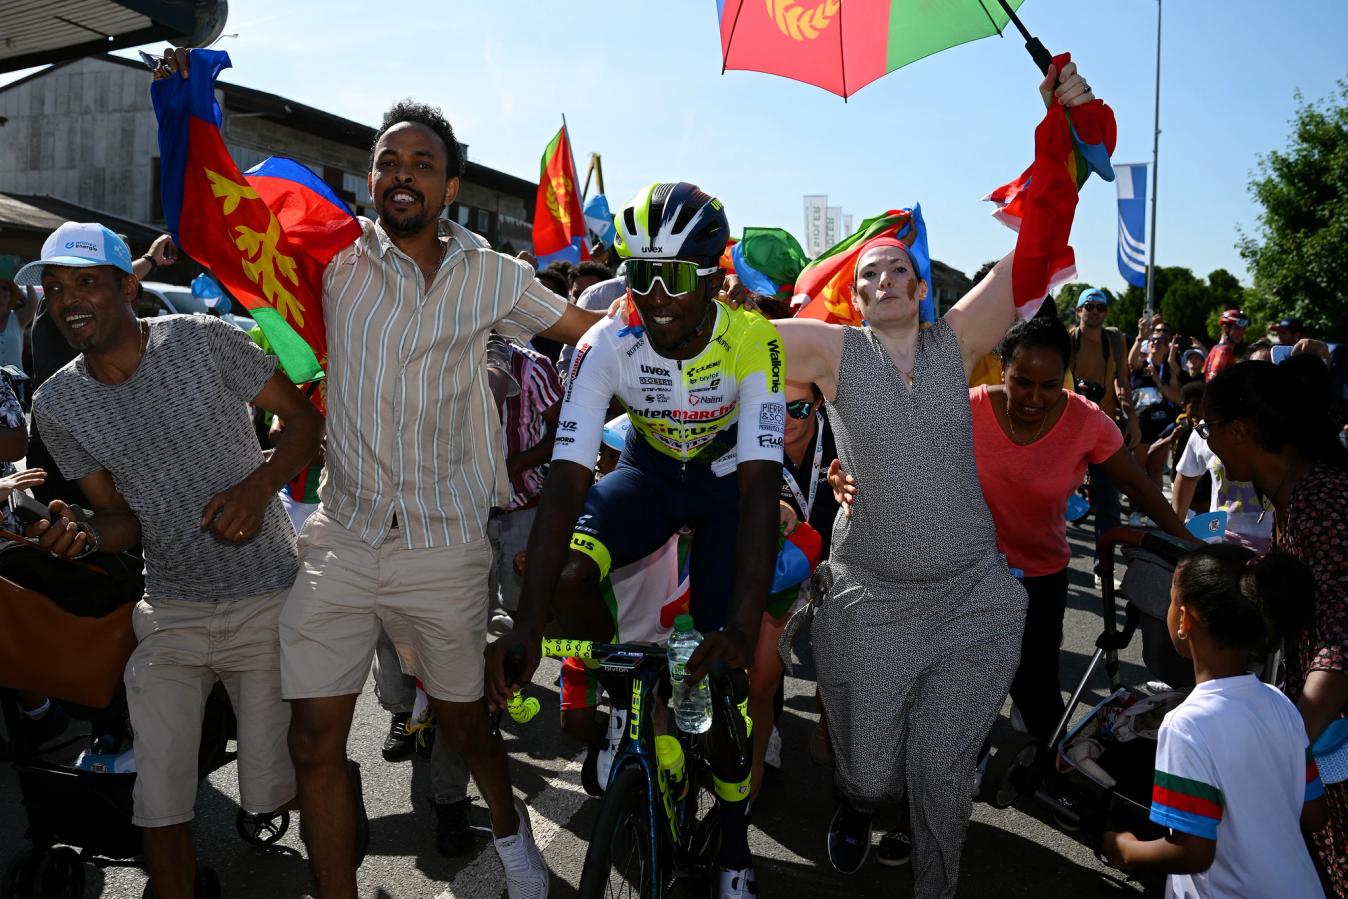 The Intermarché-Circus-Wanty rider enjoys the support of Eritrean fans across the globe